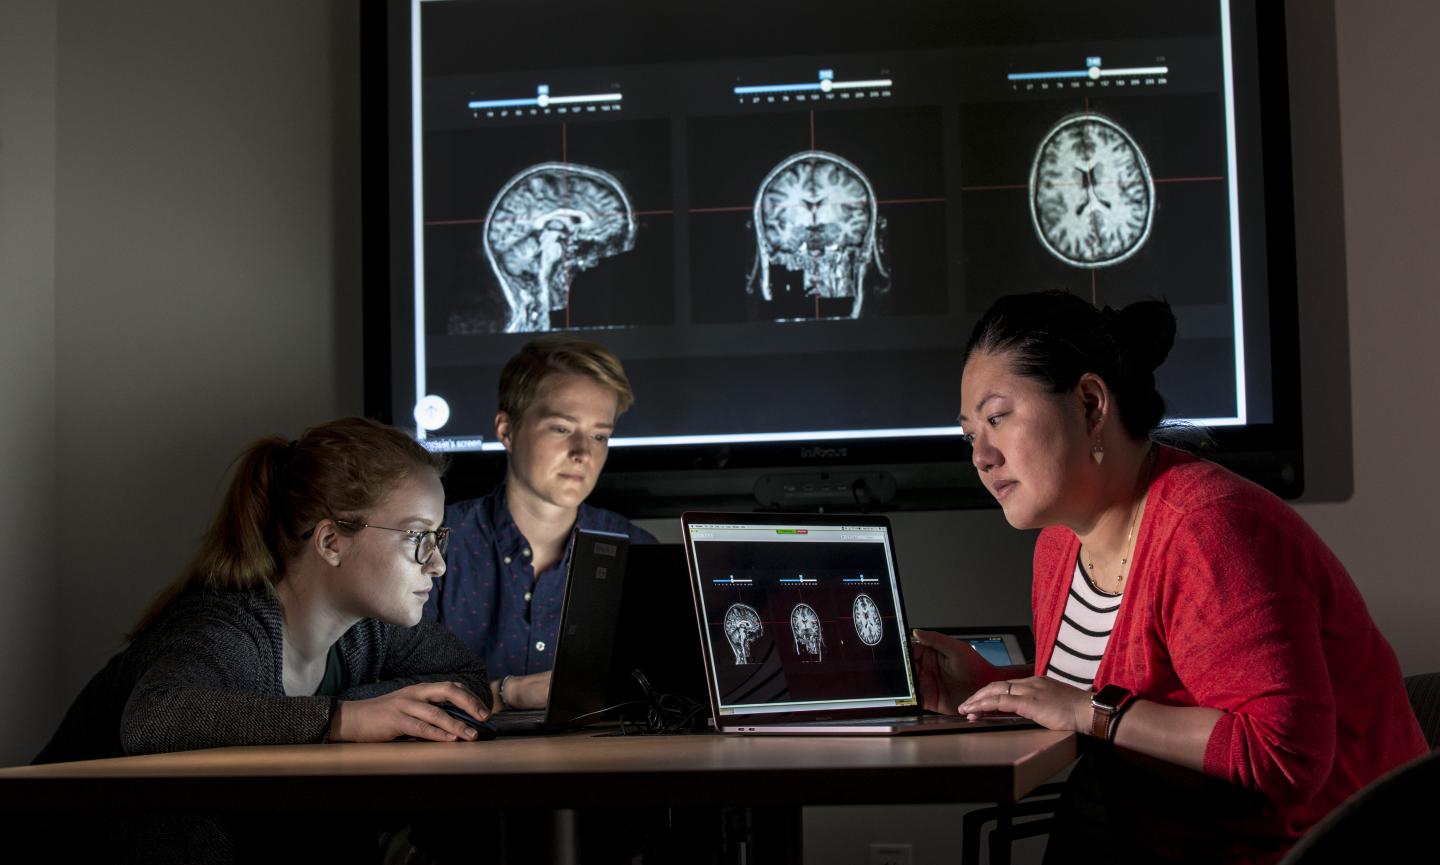 Three Marcus Institute researchers are seated at a table, each looking at a computer screen. One of the screens is facing us and displays image of three brain scans. Behind the people, the same image is projected on a large screen.